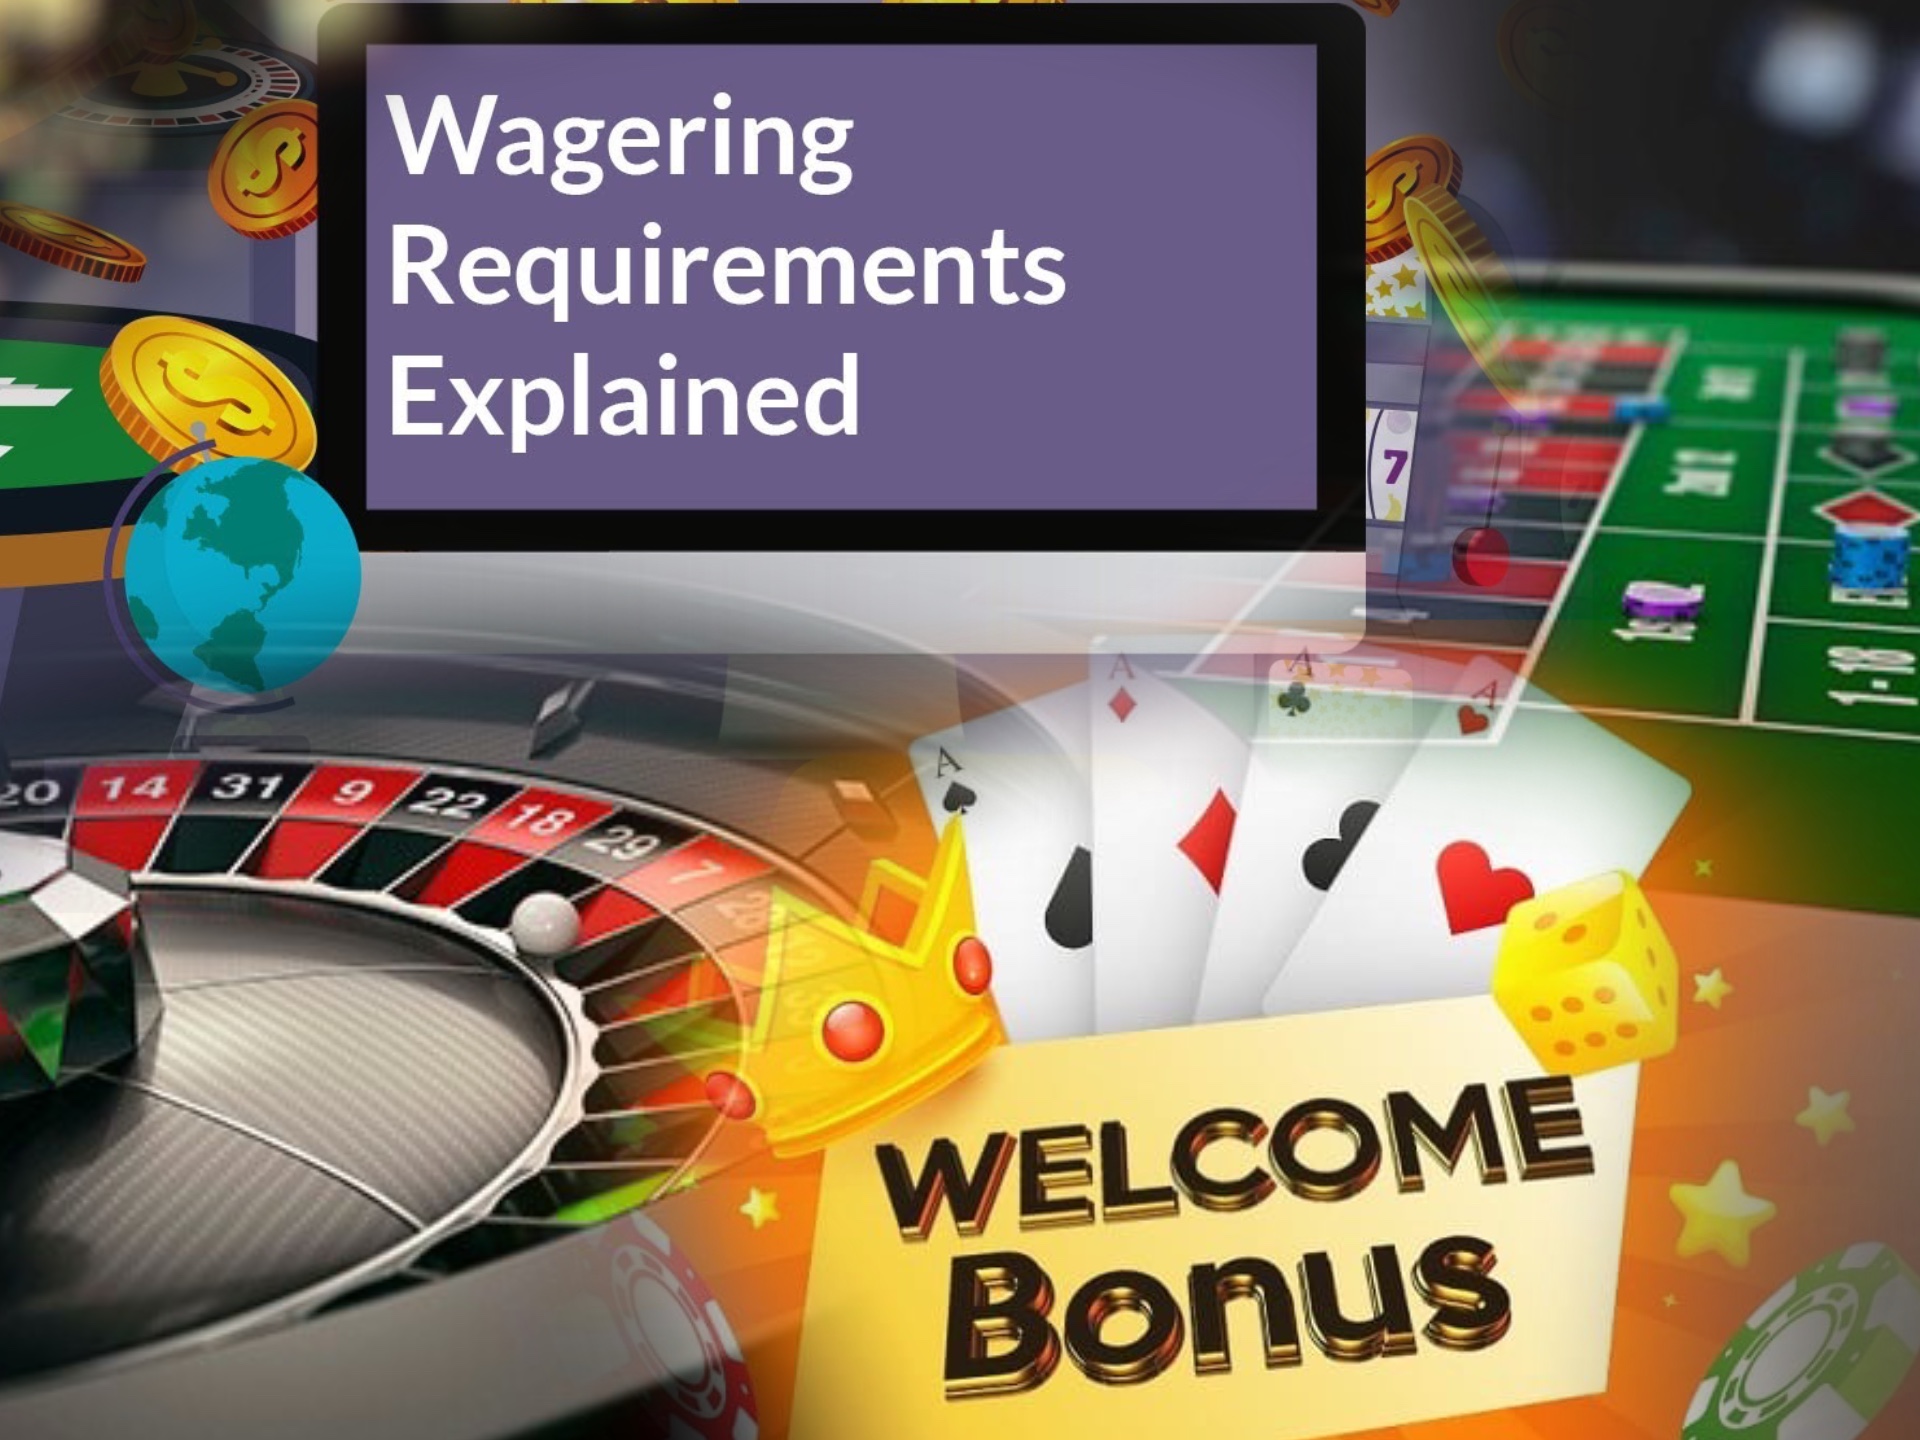 Usually you have to wager your welcome bonus is specific online casino slots.